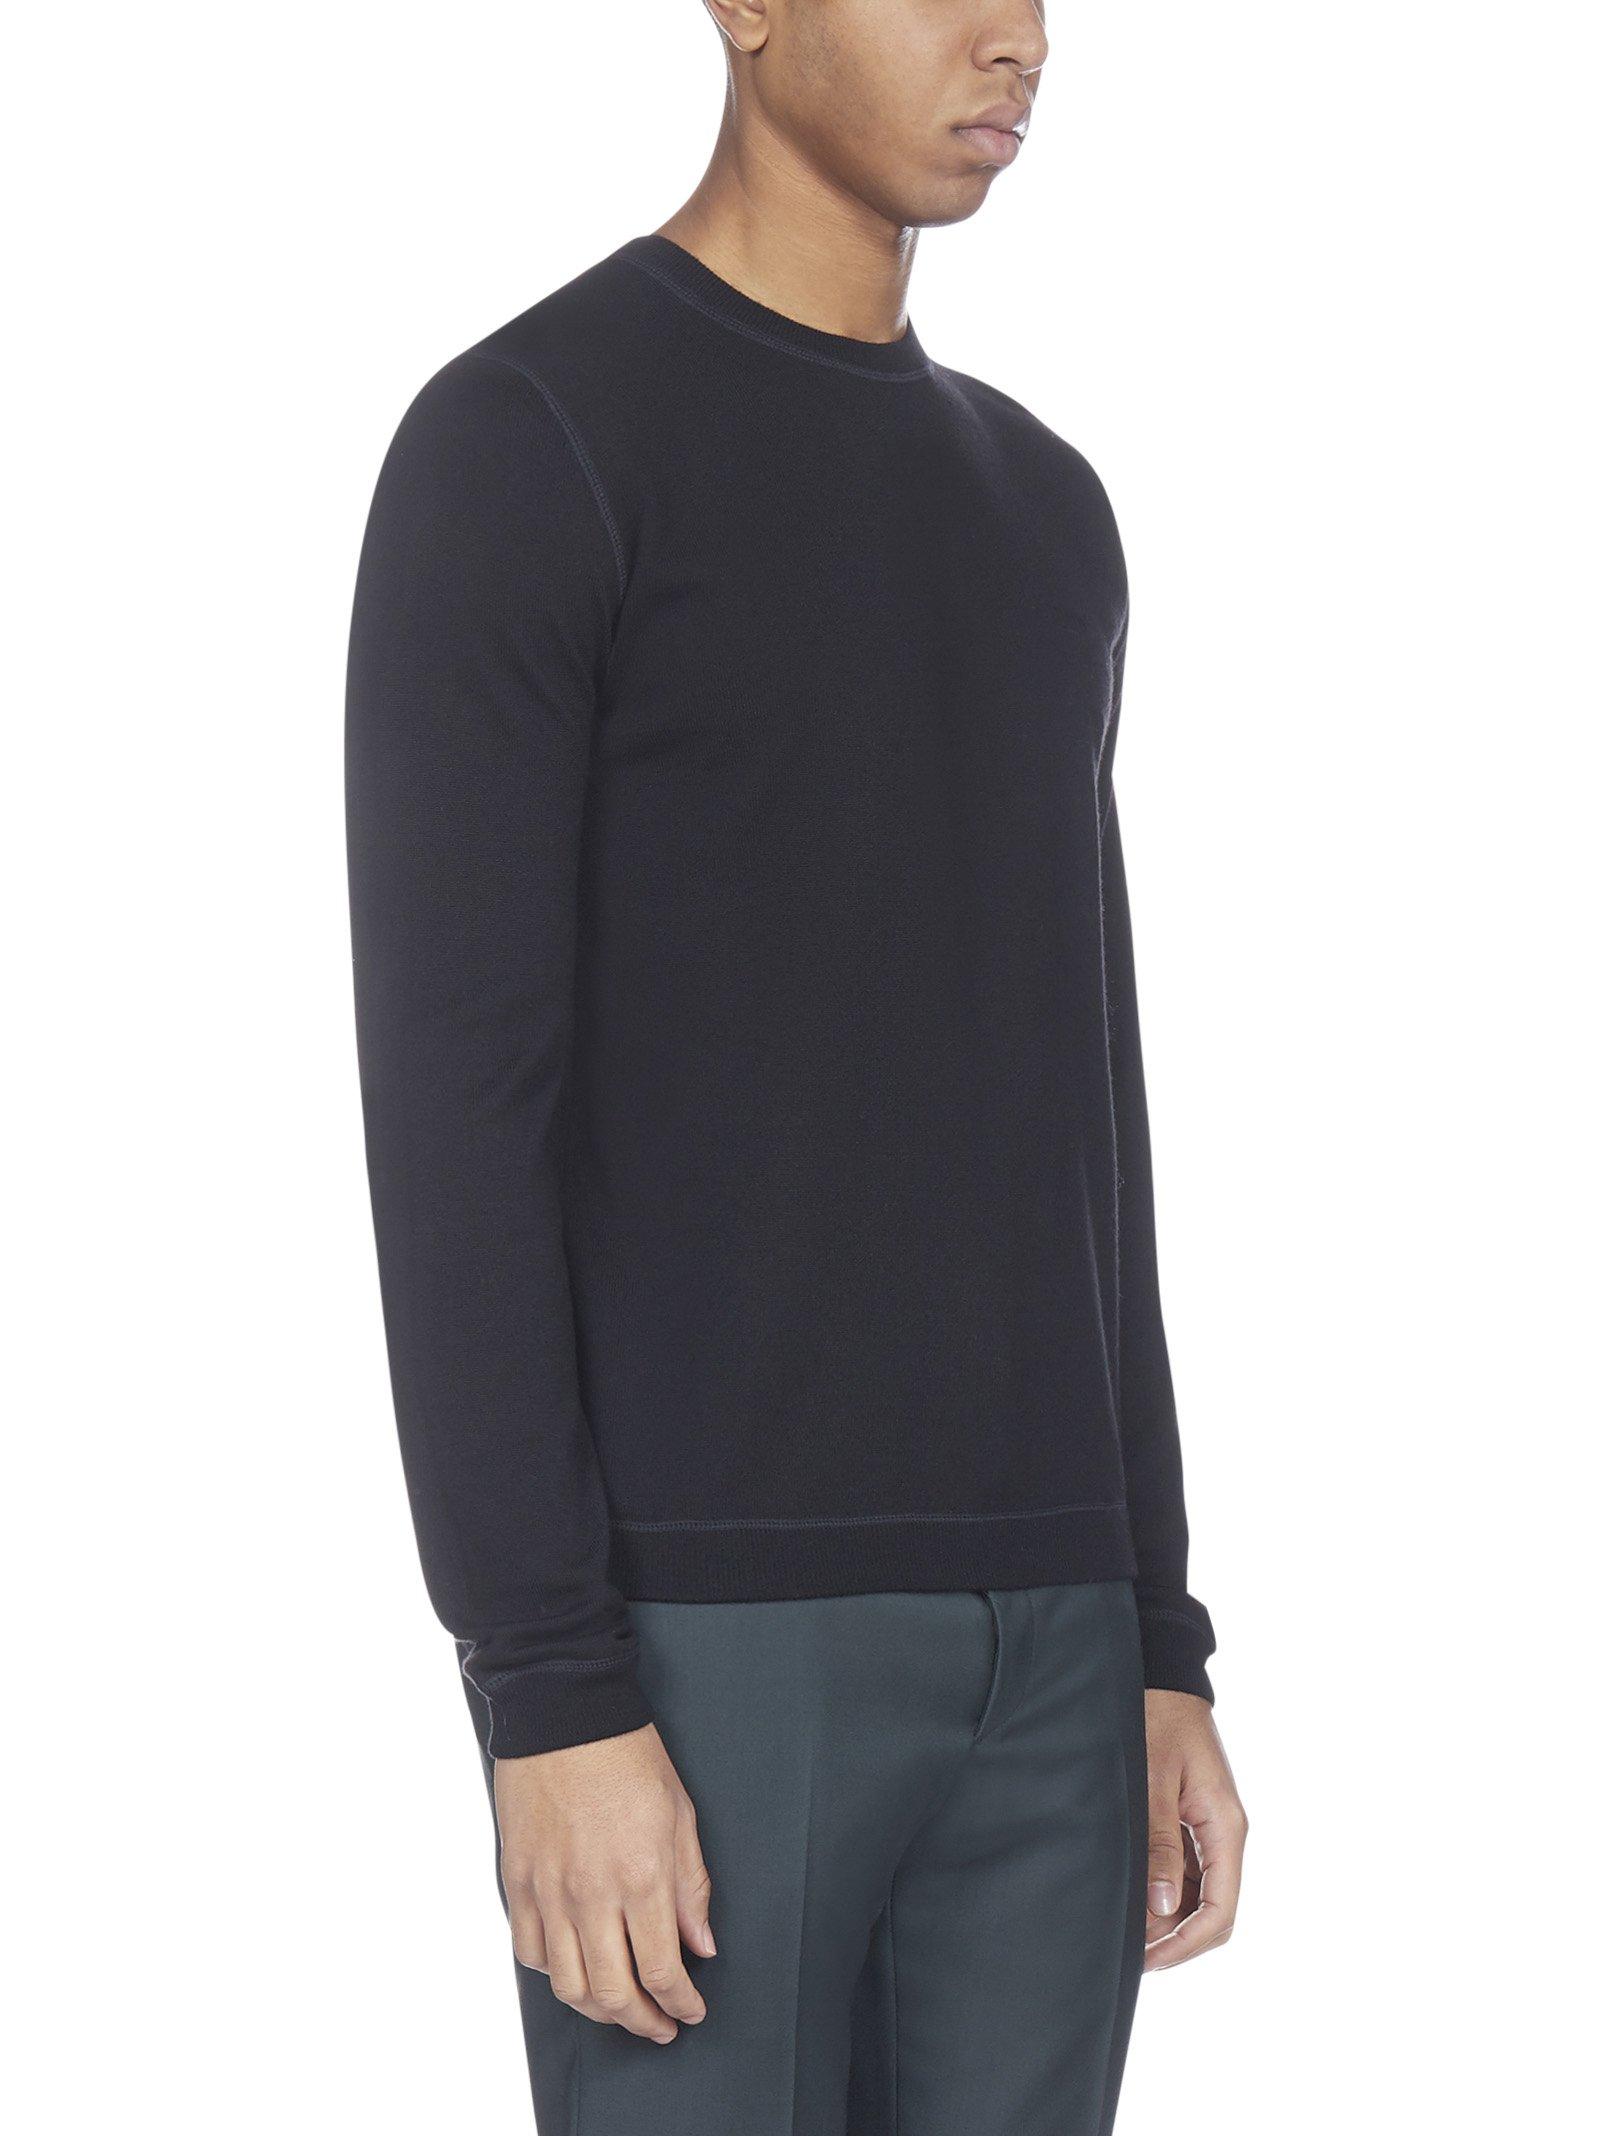 Prada Wool Logo Embroidered Sweater in Black for Men - Lyst